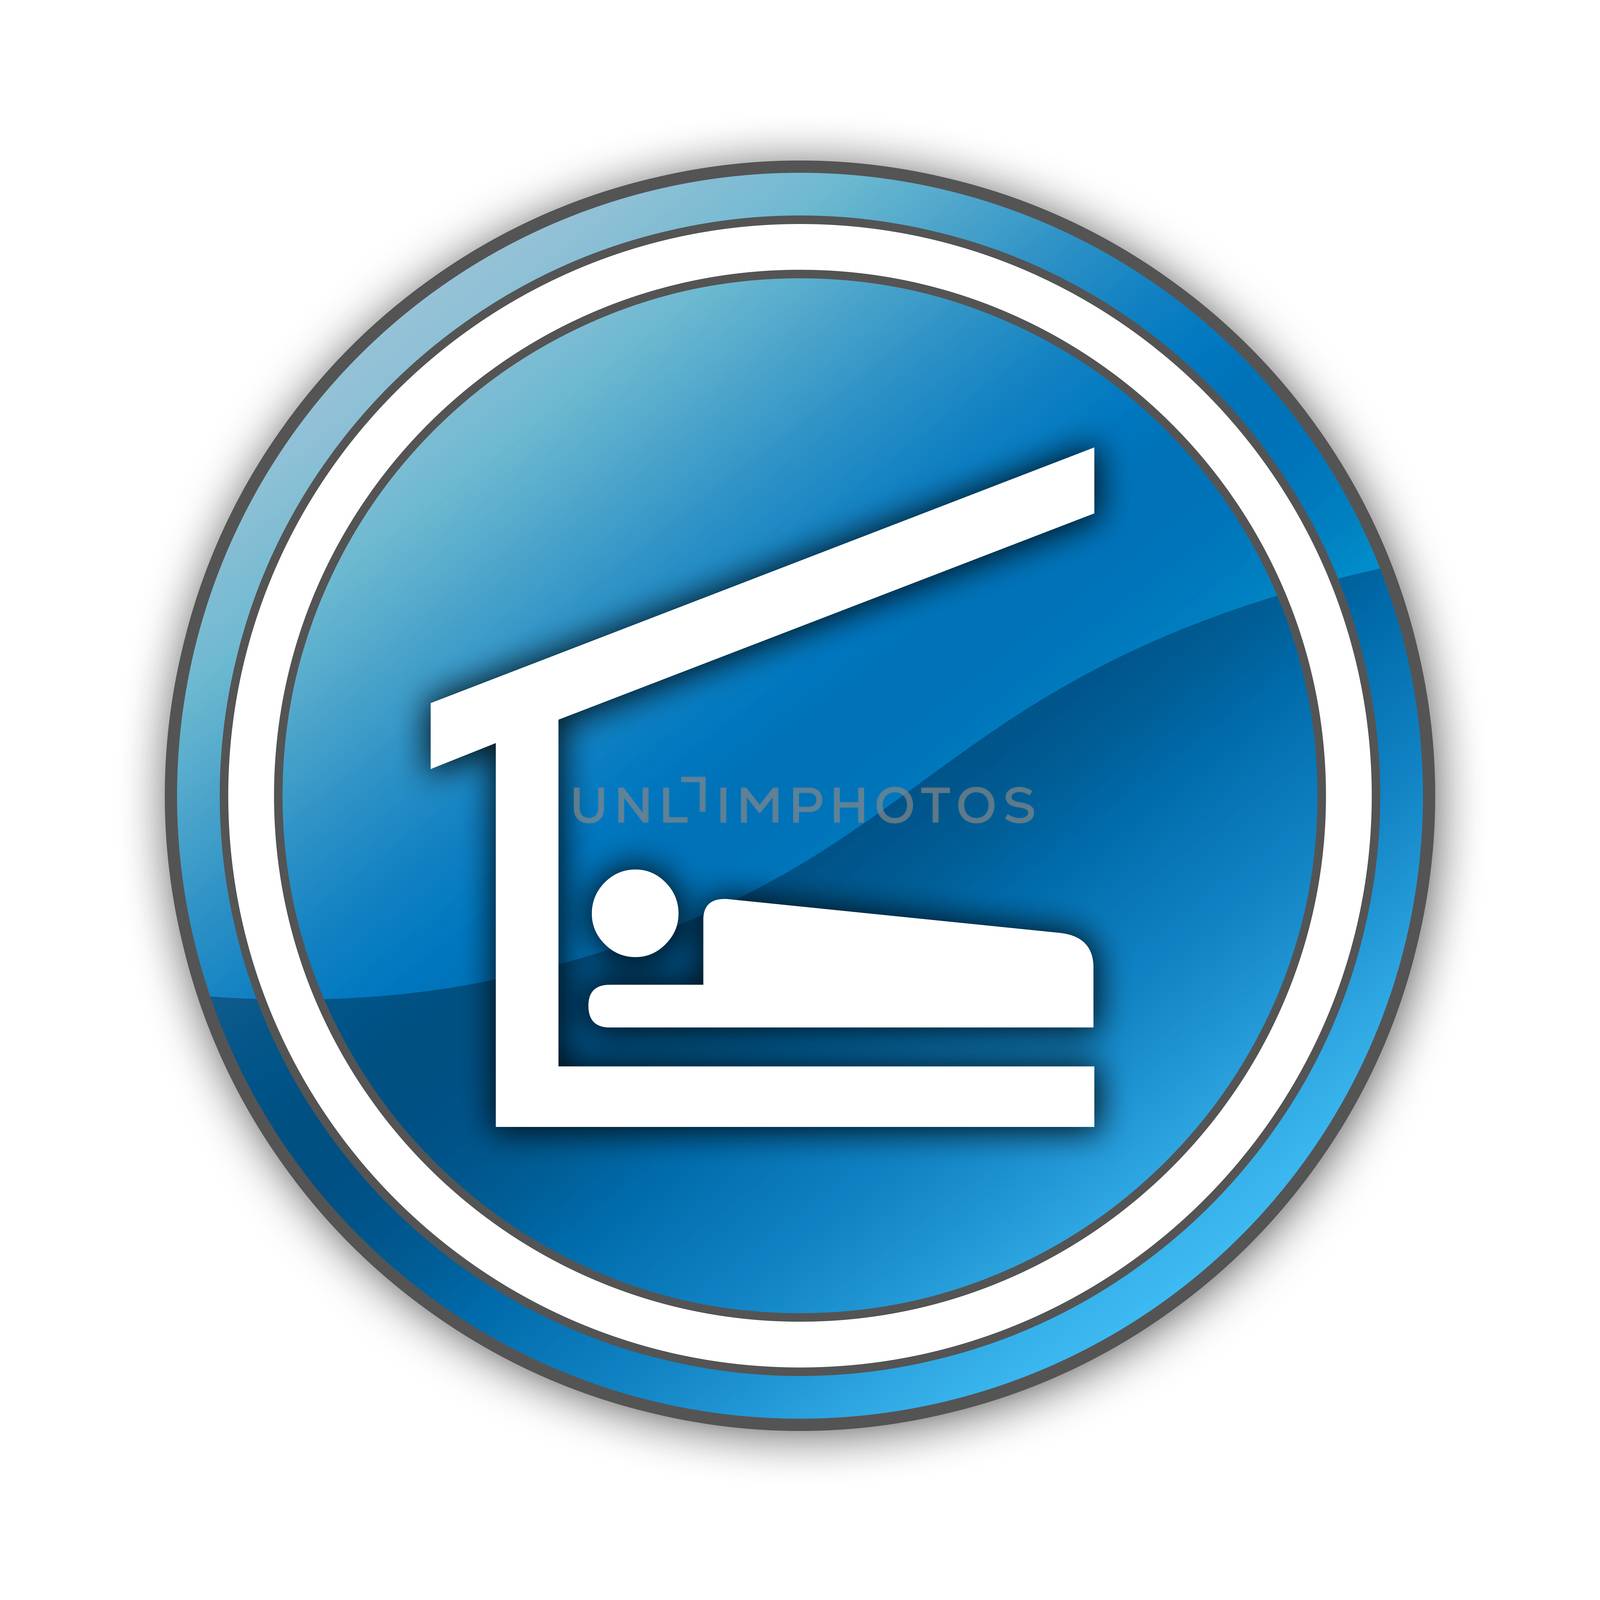 Icon, Button, Pictogram Sleeping Shelter by mindscanner